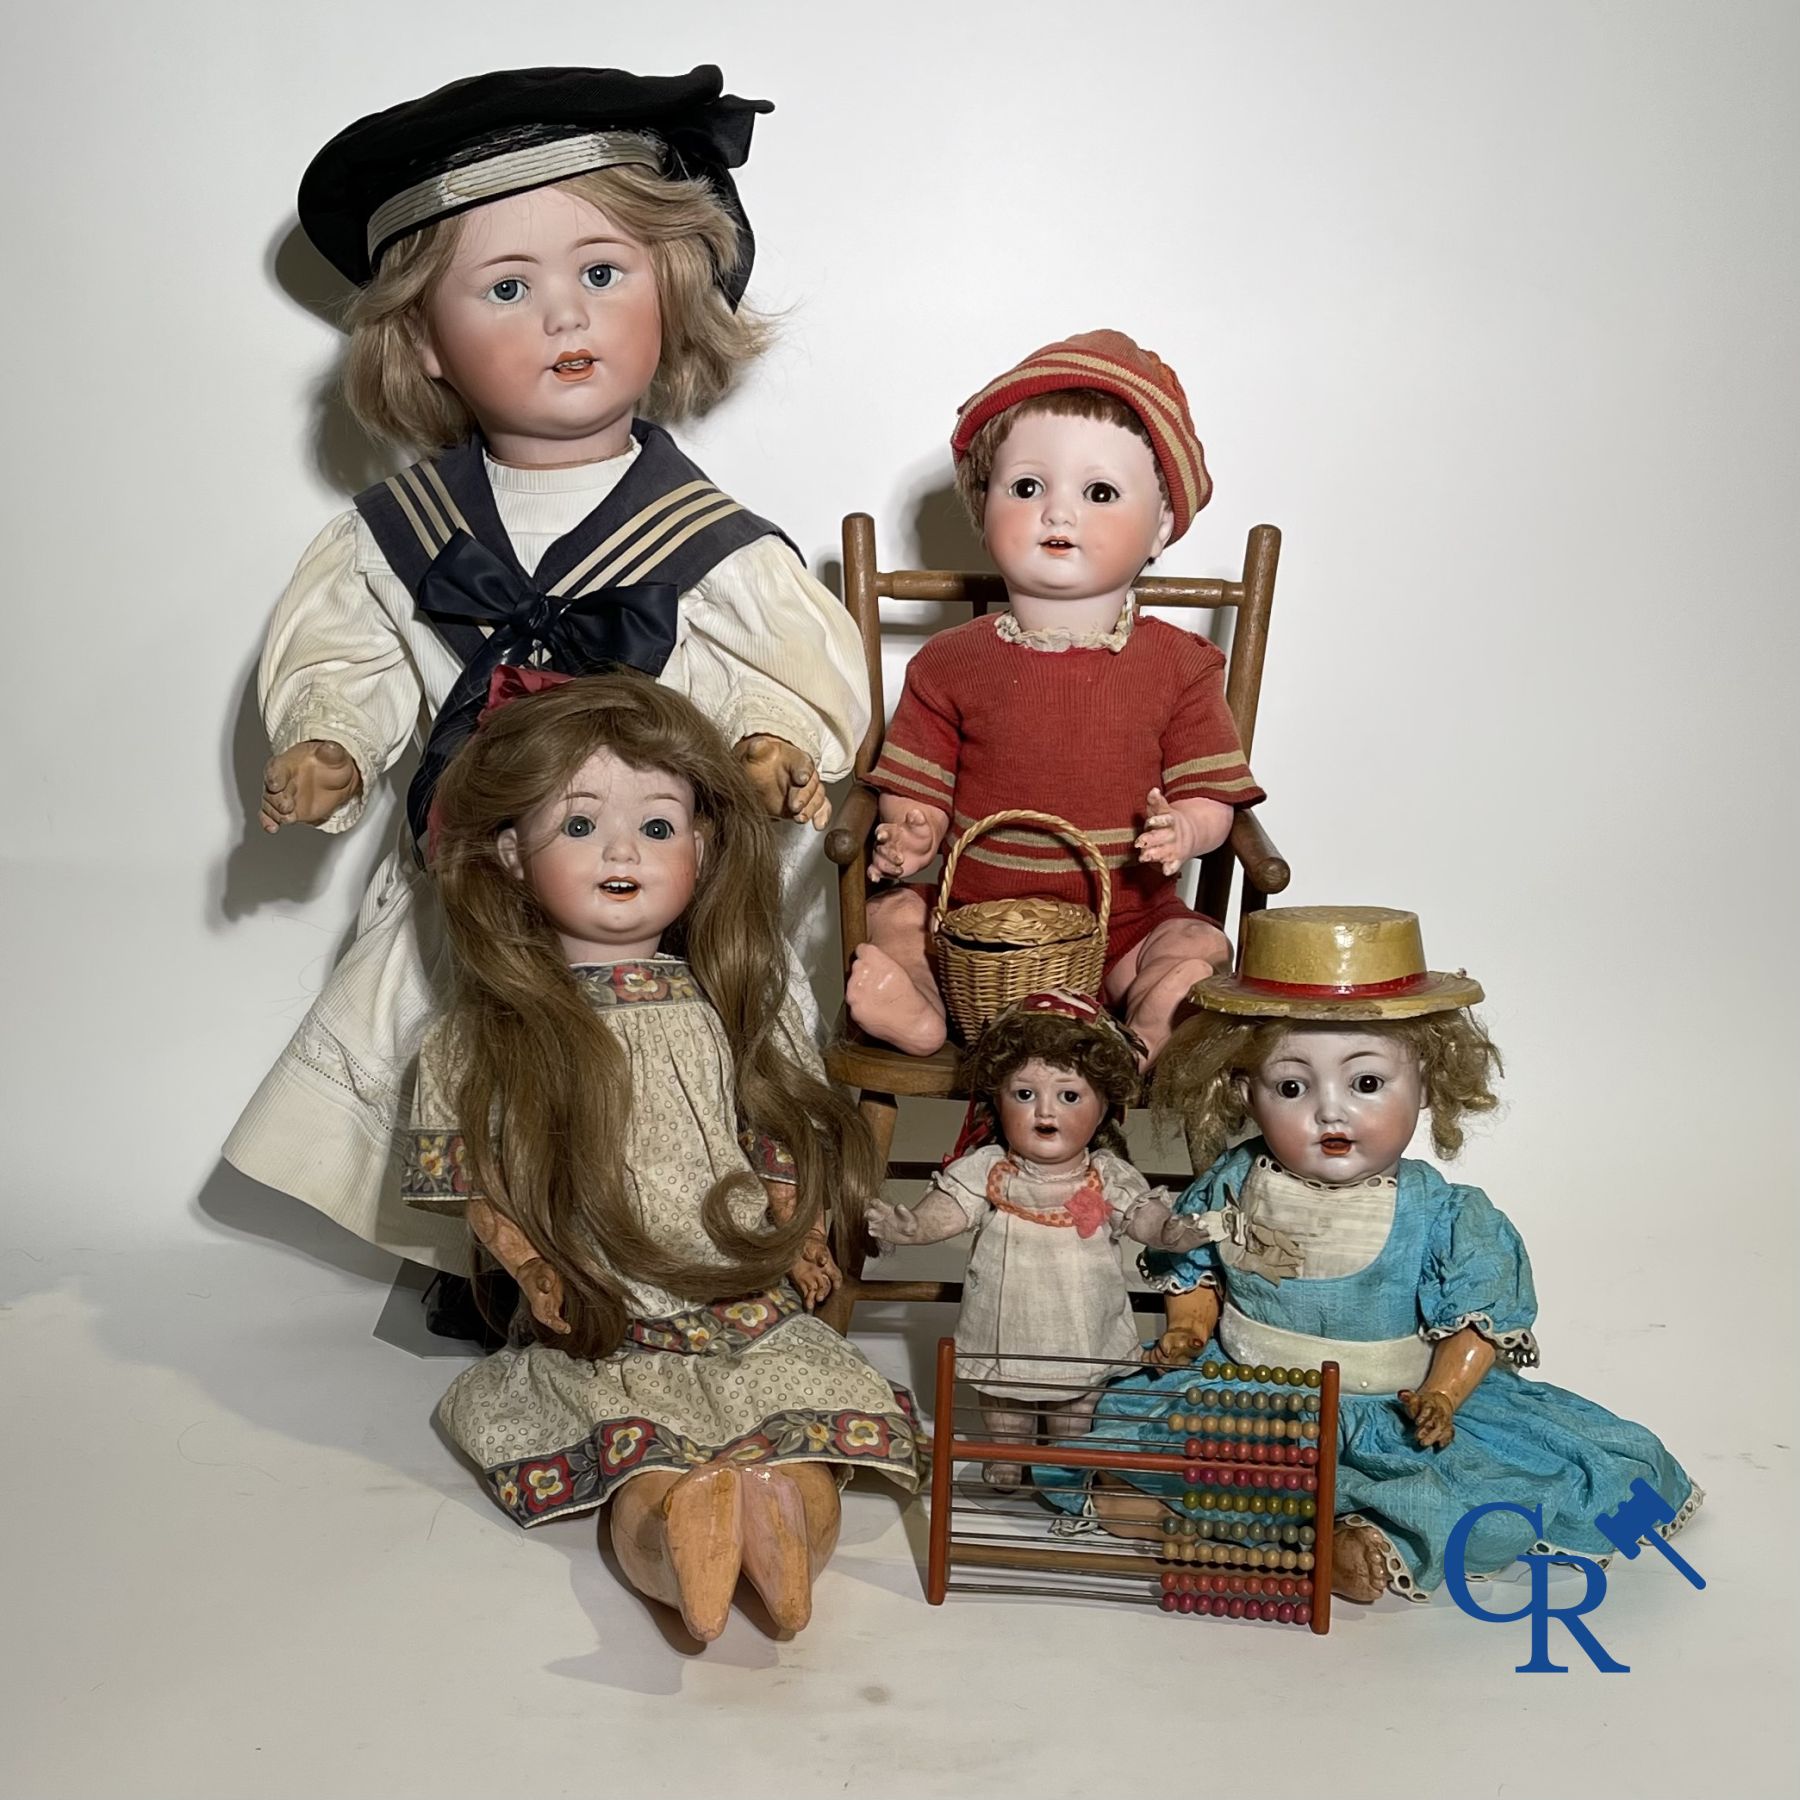 Toys: antique dolls: 5 German character dolls with porcelain head.